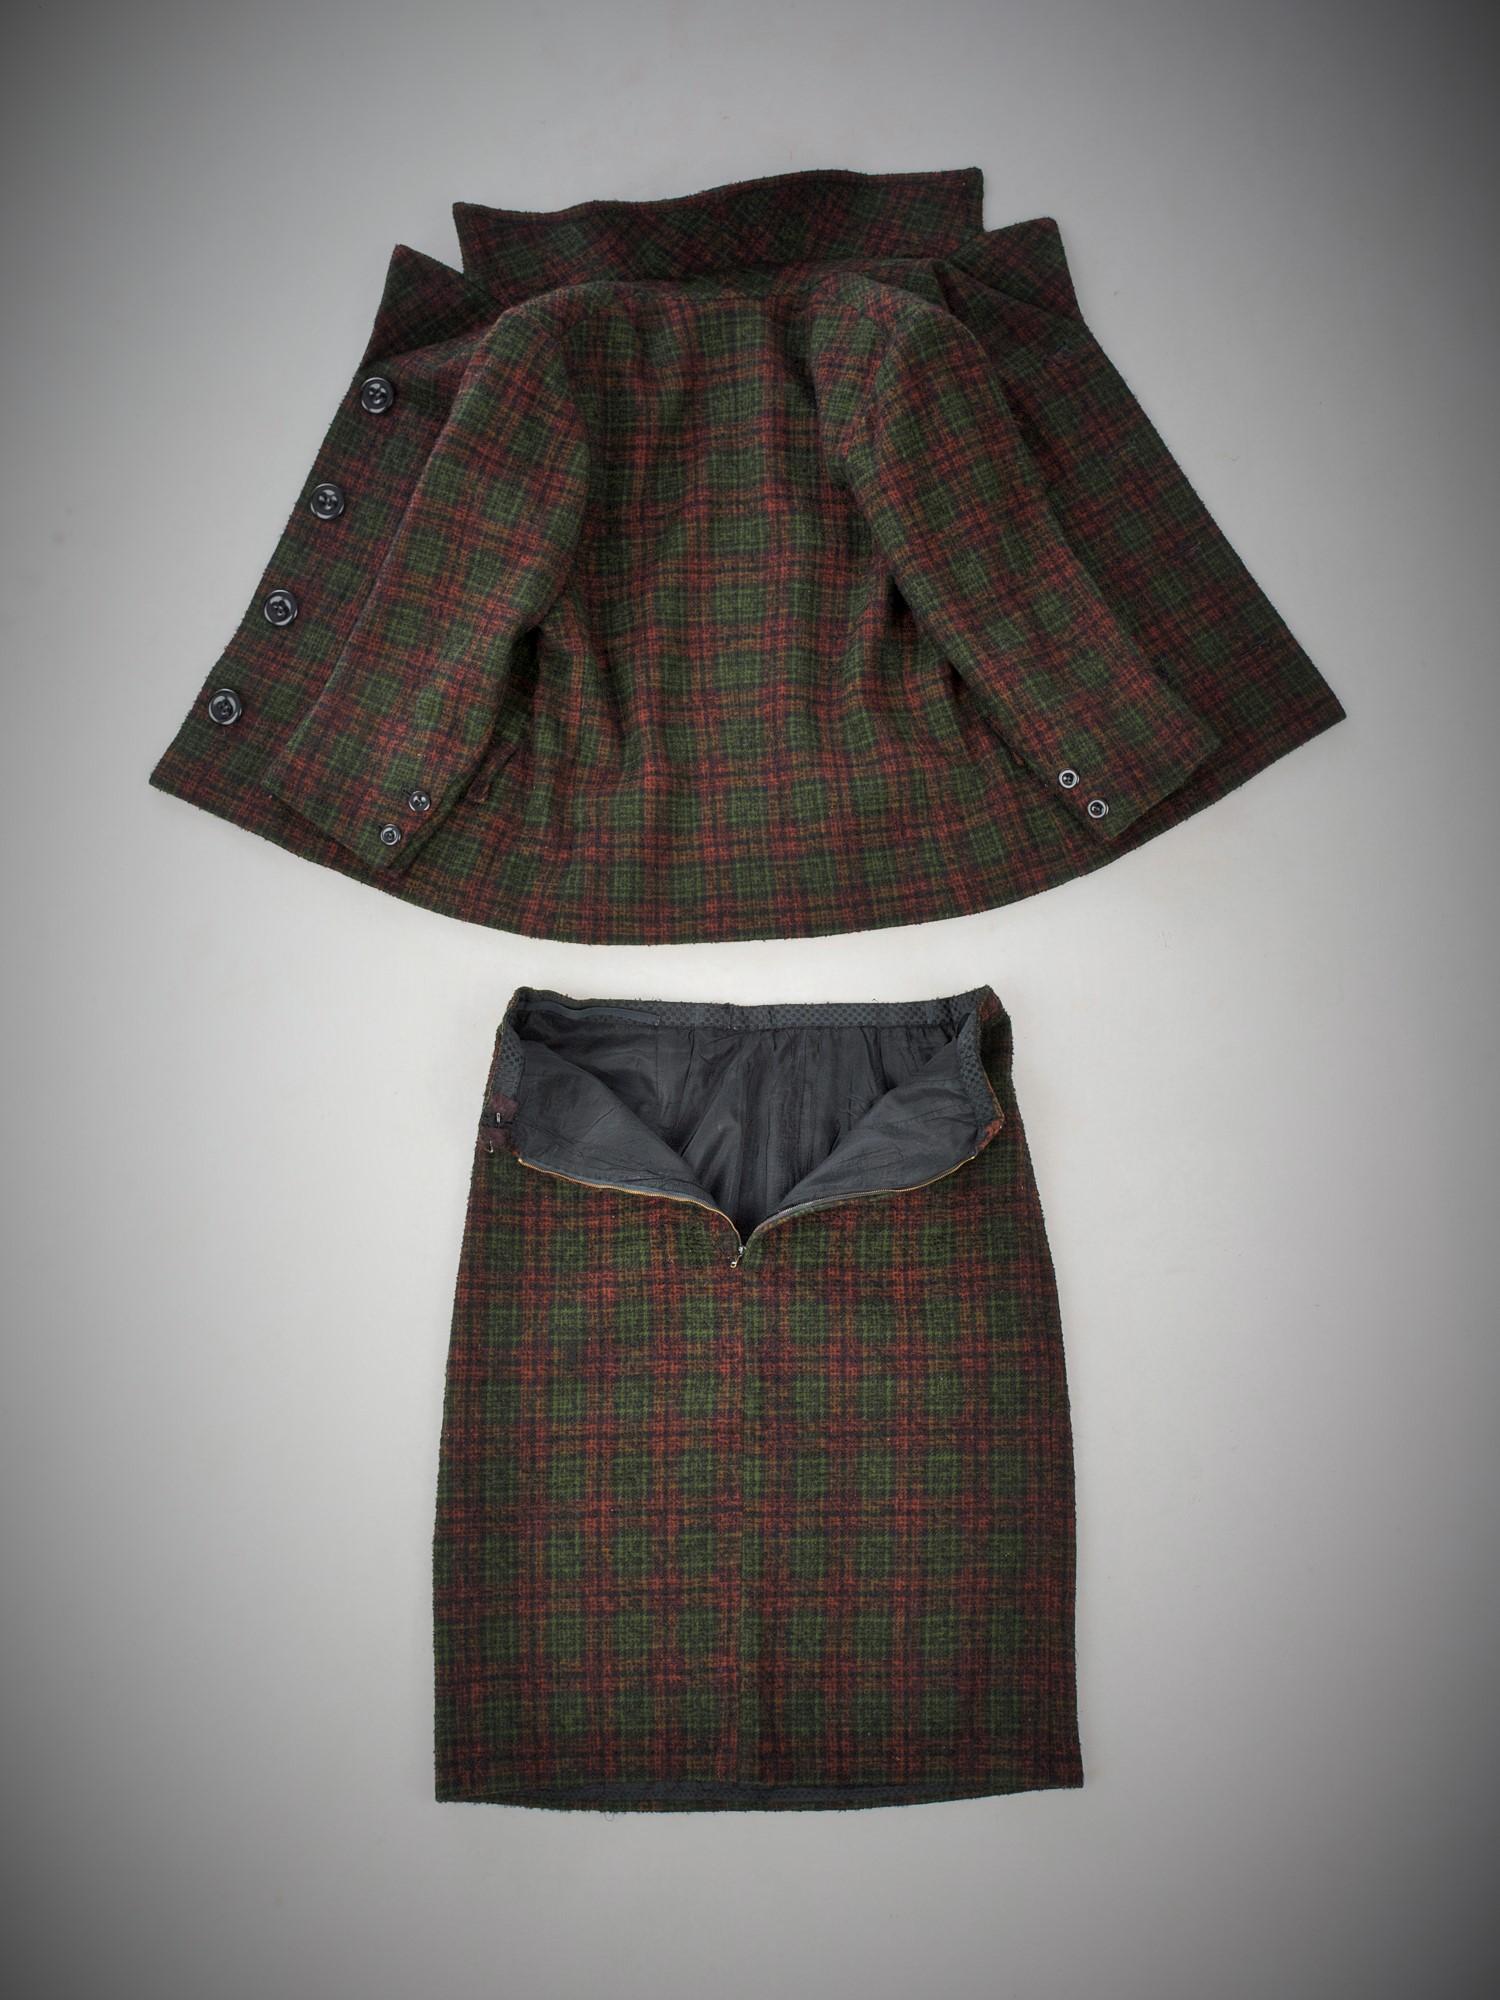 Black A French Dior/Bérénice Demi Couture skirt suit Wool Tartan, French Circa 1970 For Sale